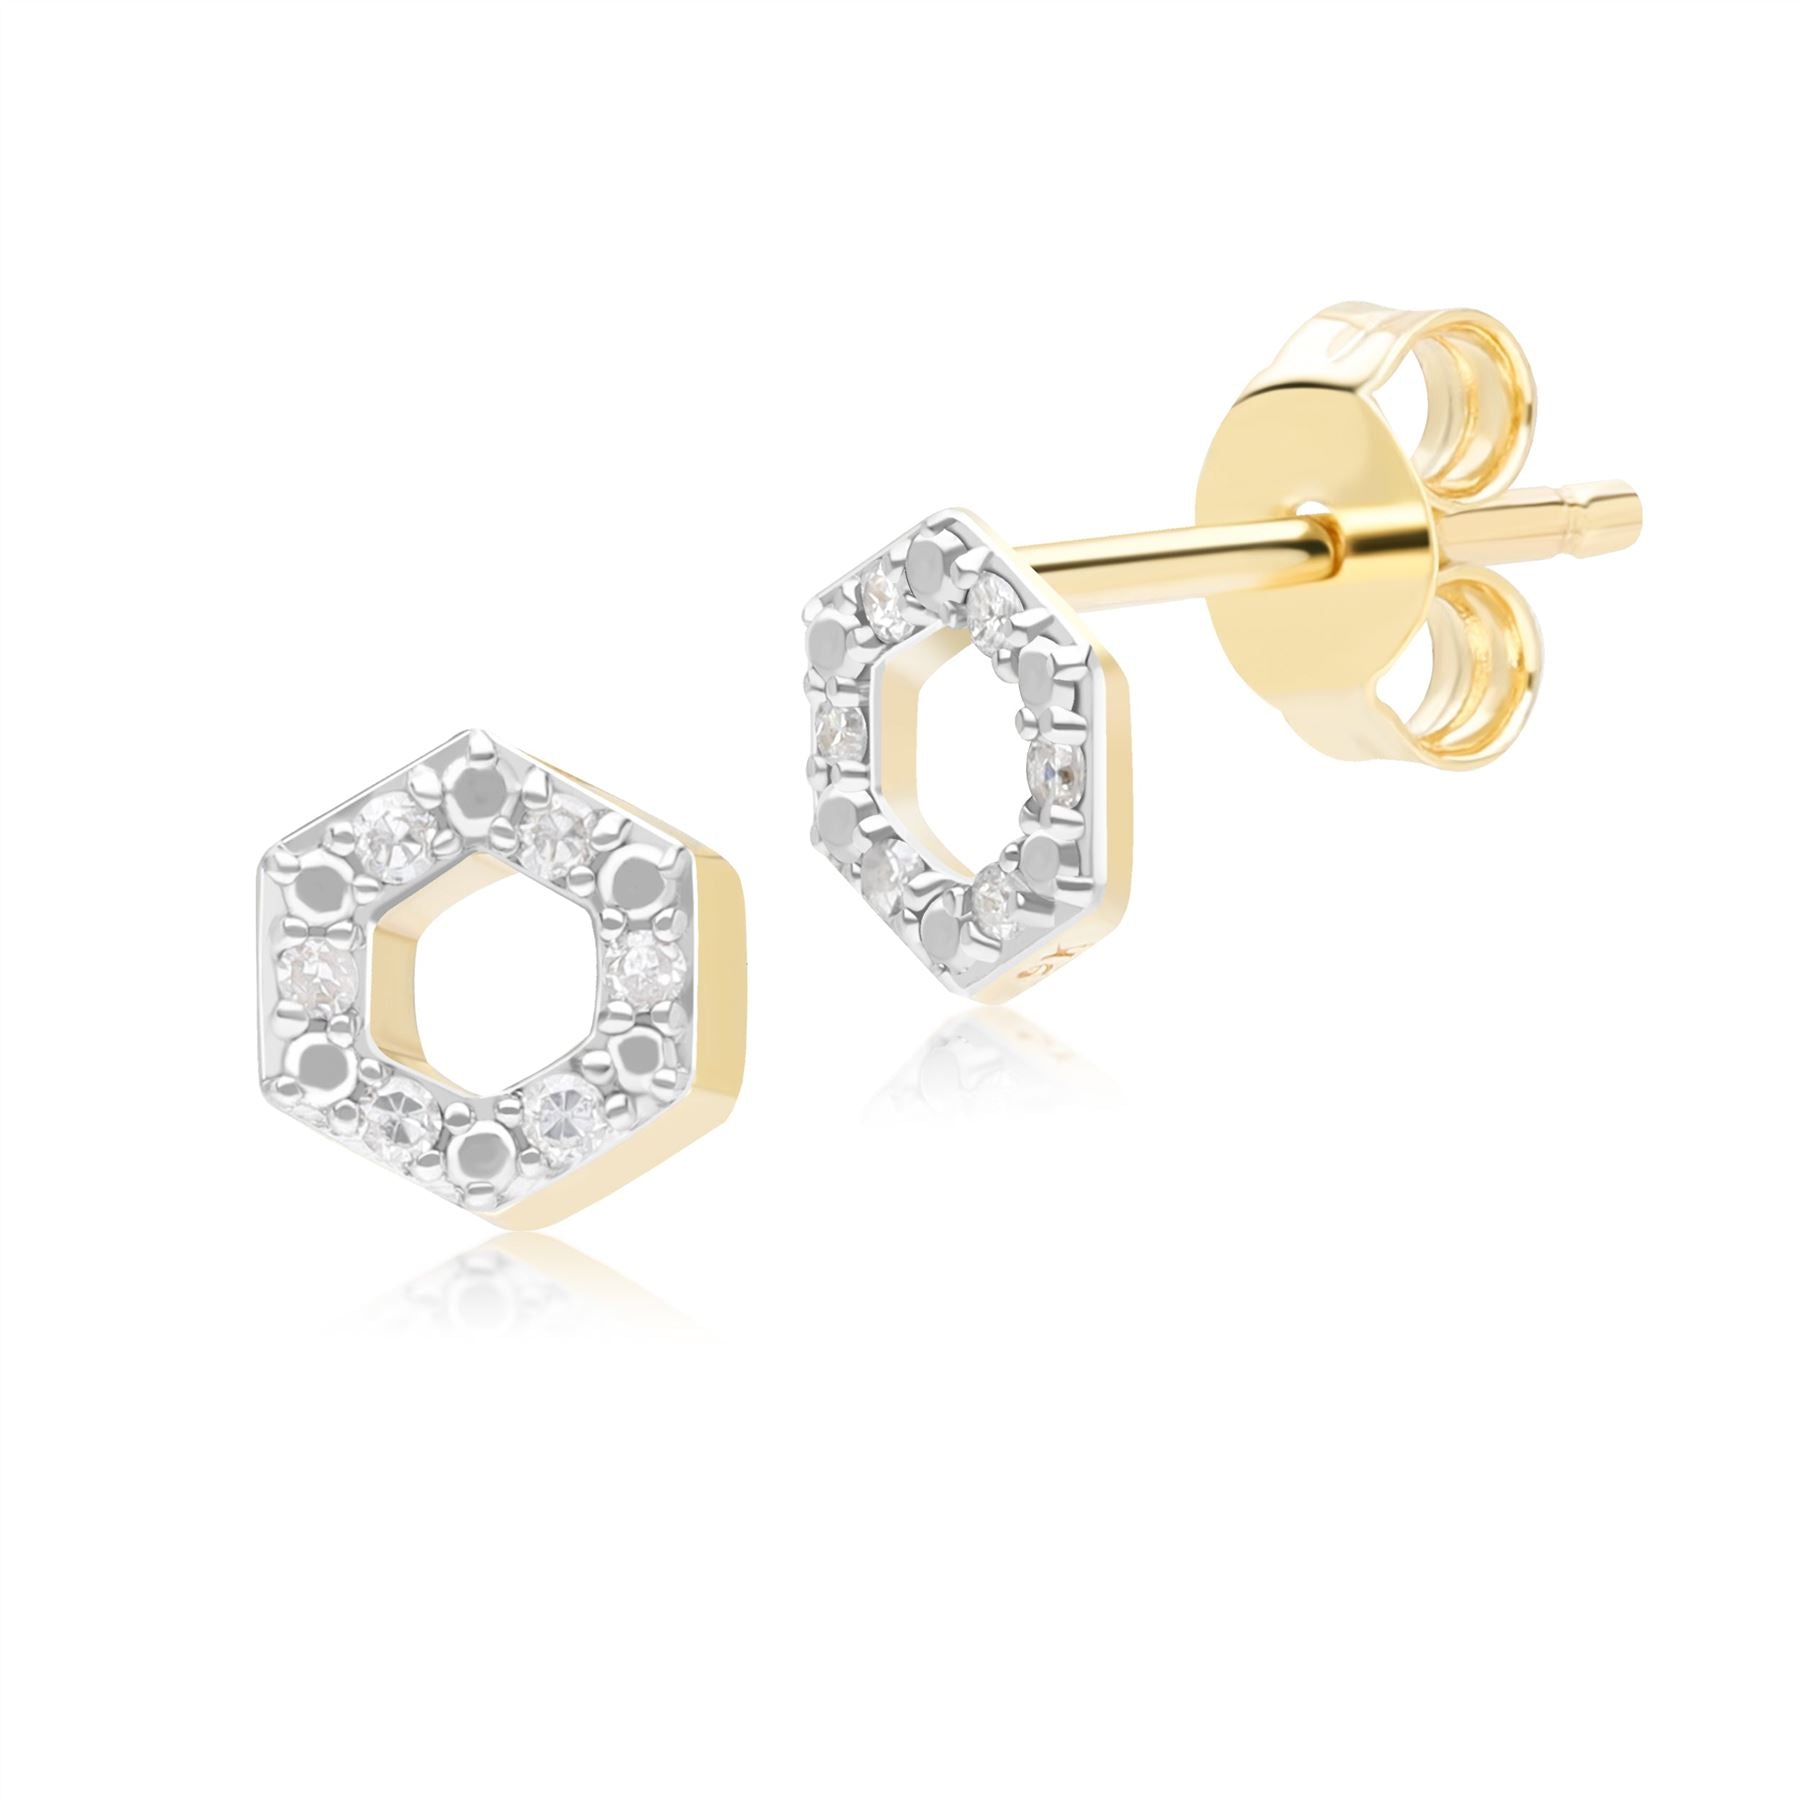 Geometric Hex Diamond Stud Earrings in 9ct Yellow Gold Front